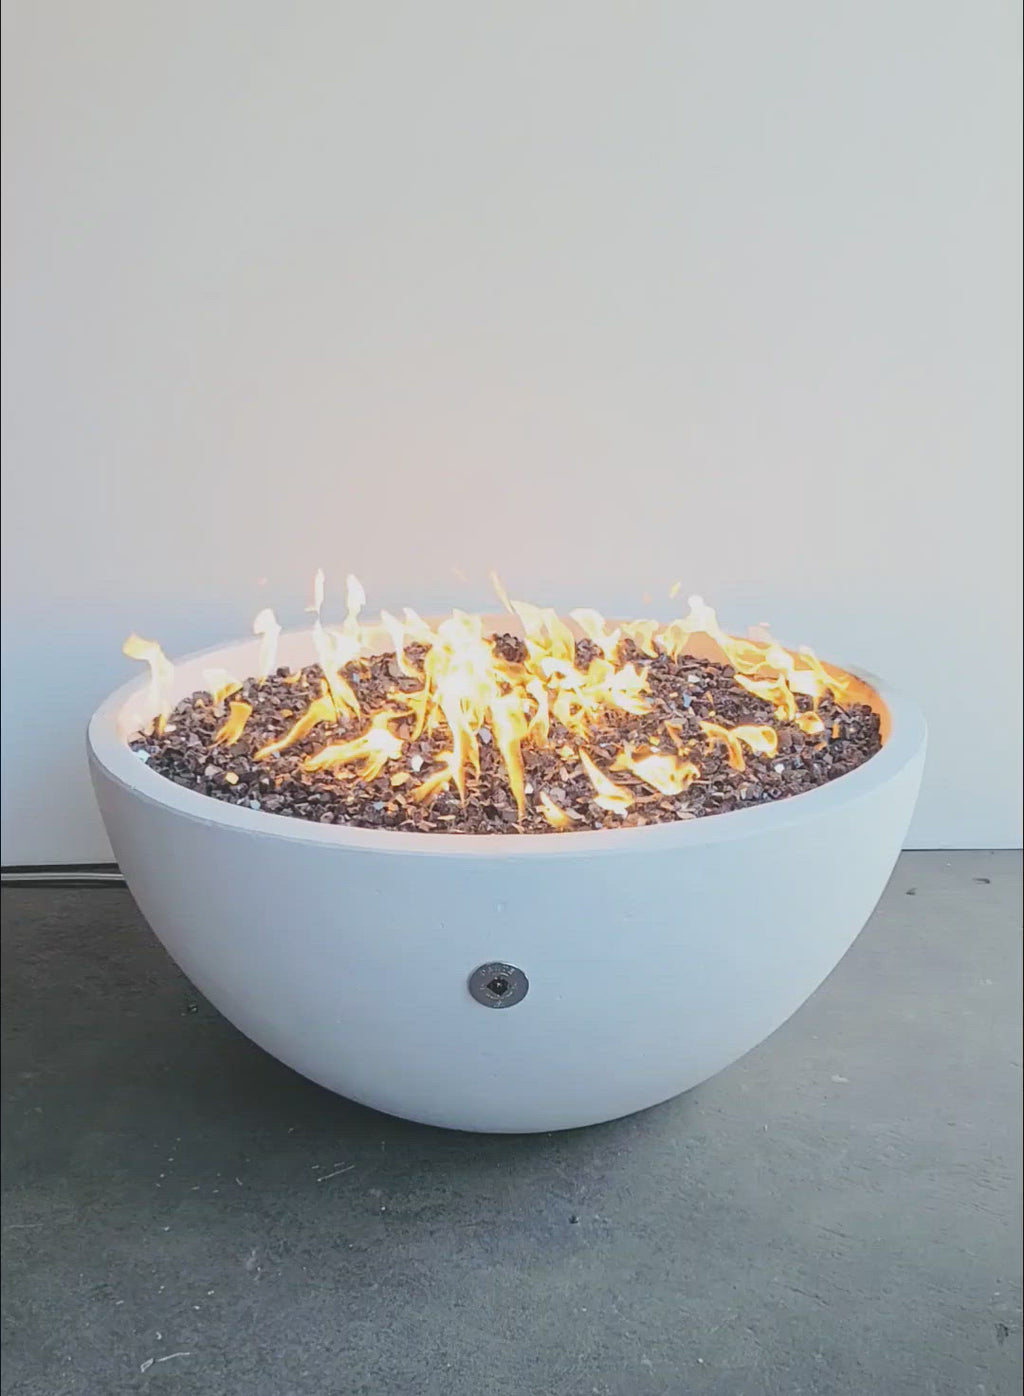 Pottery works 36 Inch Round Firebowl Fire Pit Instructions